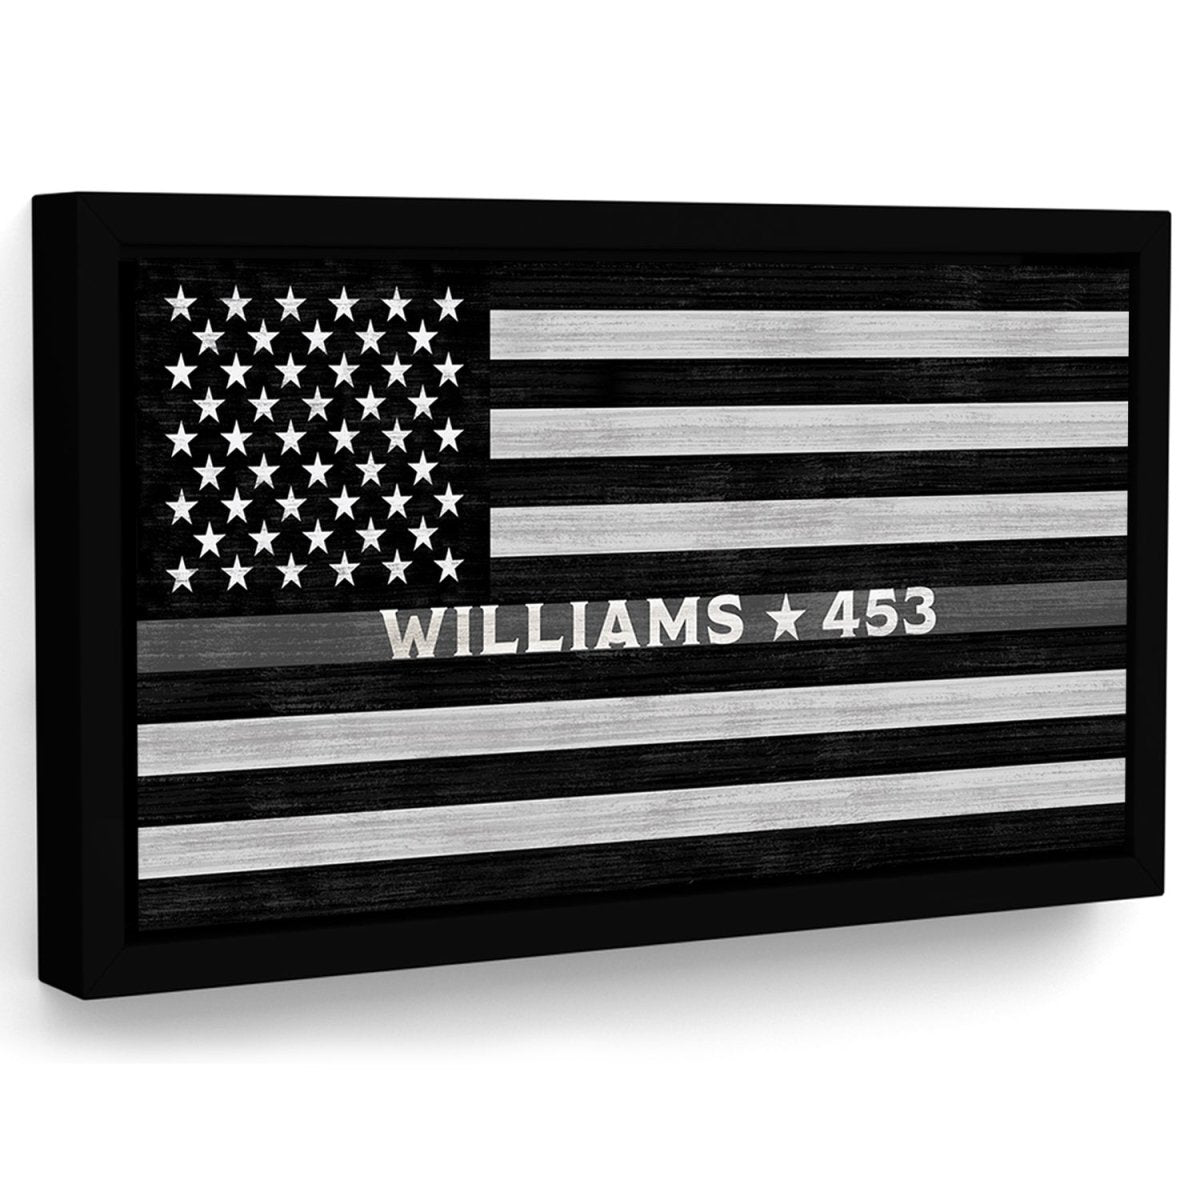 Correctional Officer Wall Art Personalized With Name - Pretty Perfect Studio